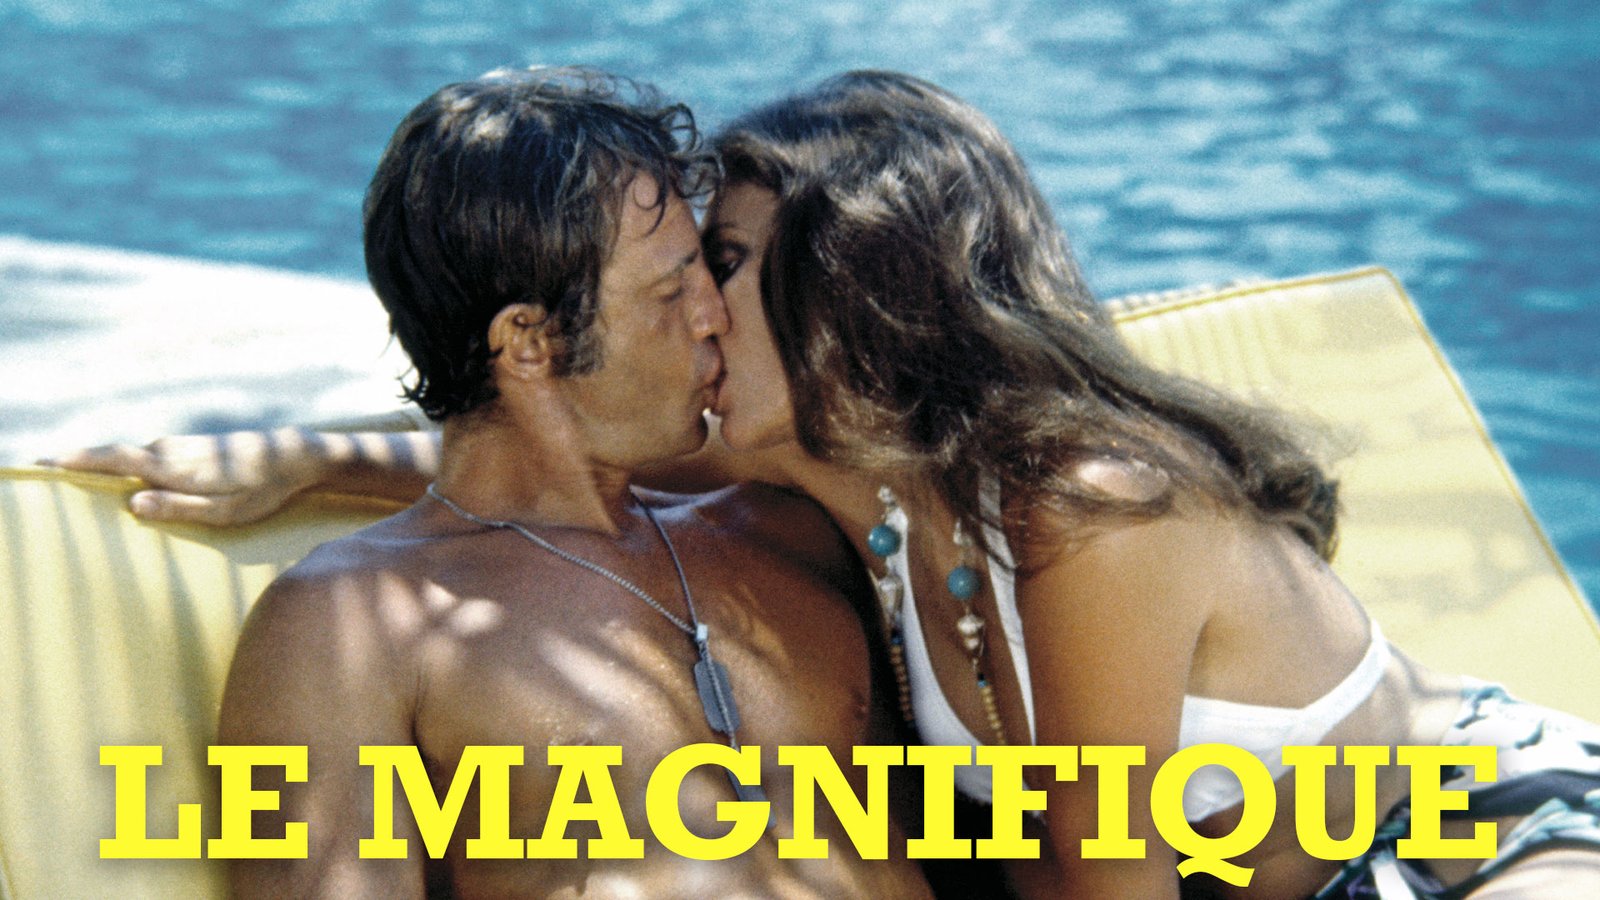 The Man from Acapulco - Le Magnifique